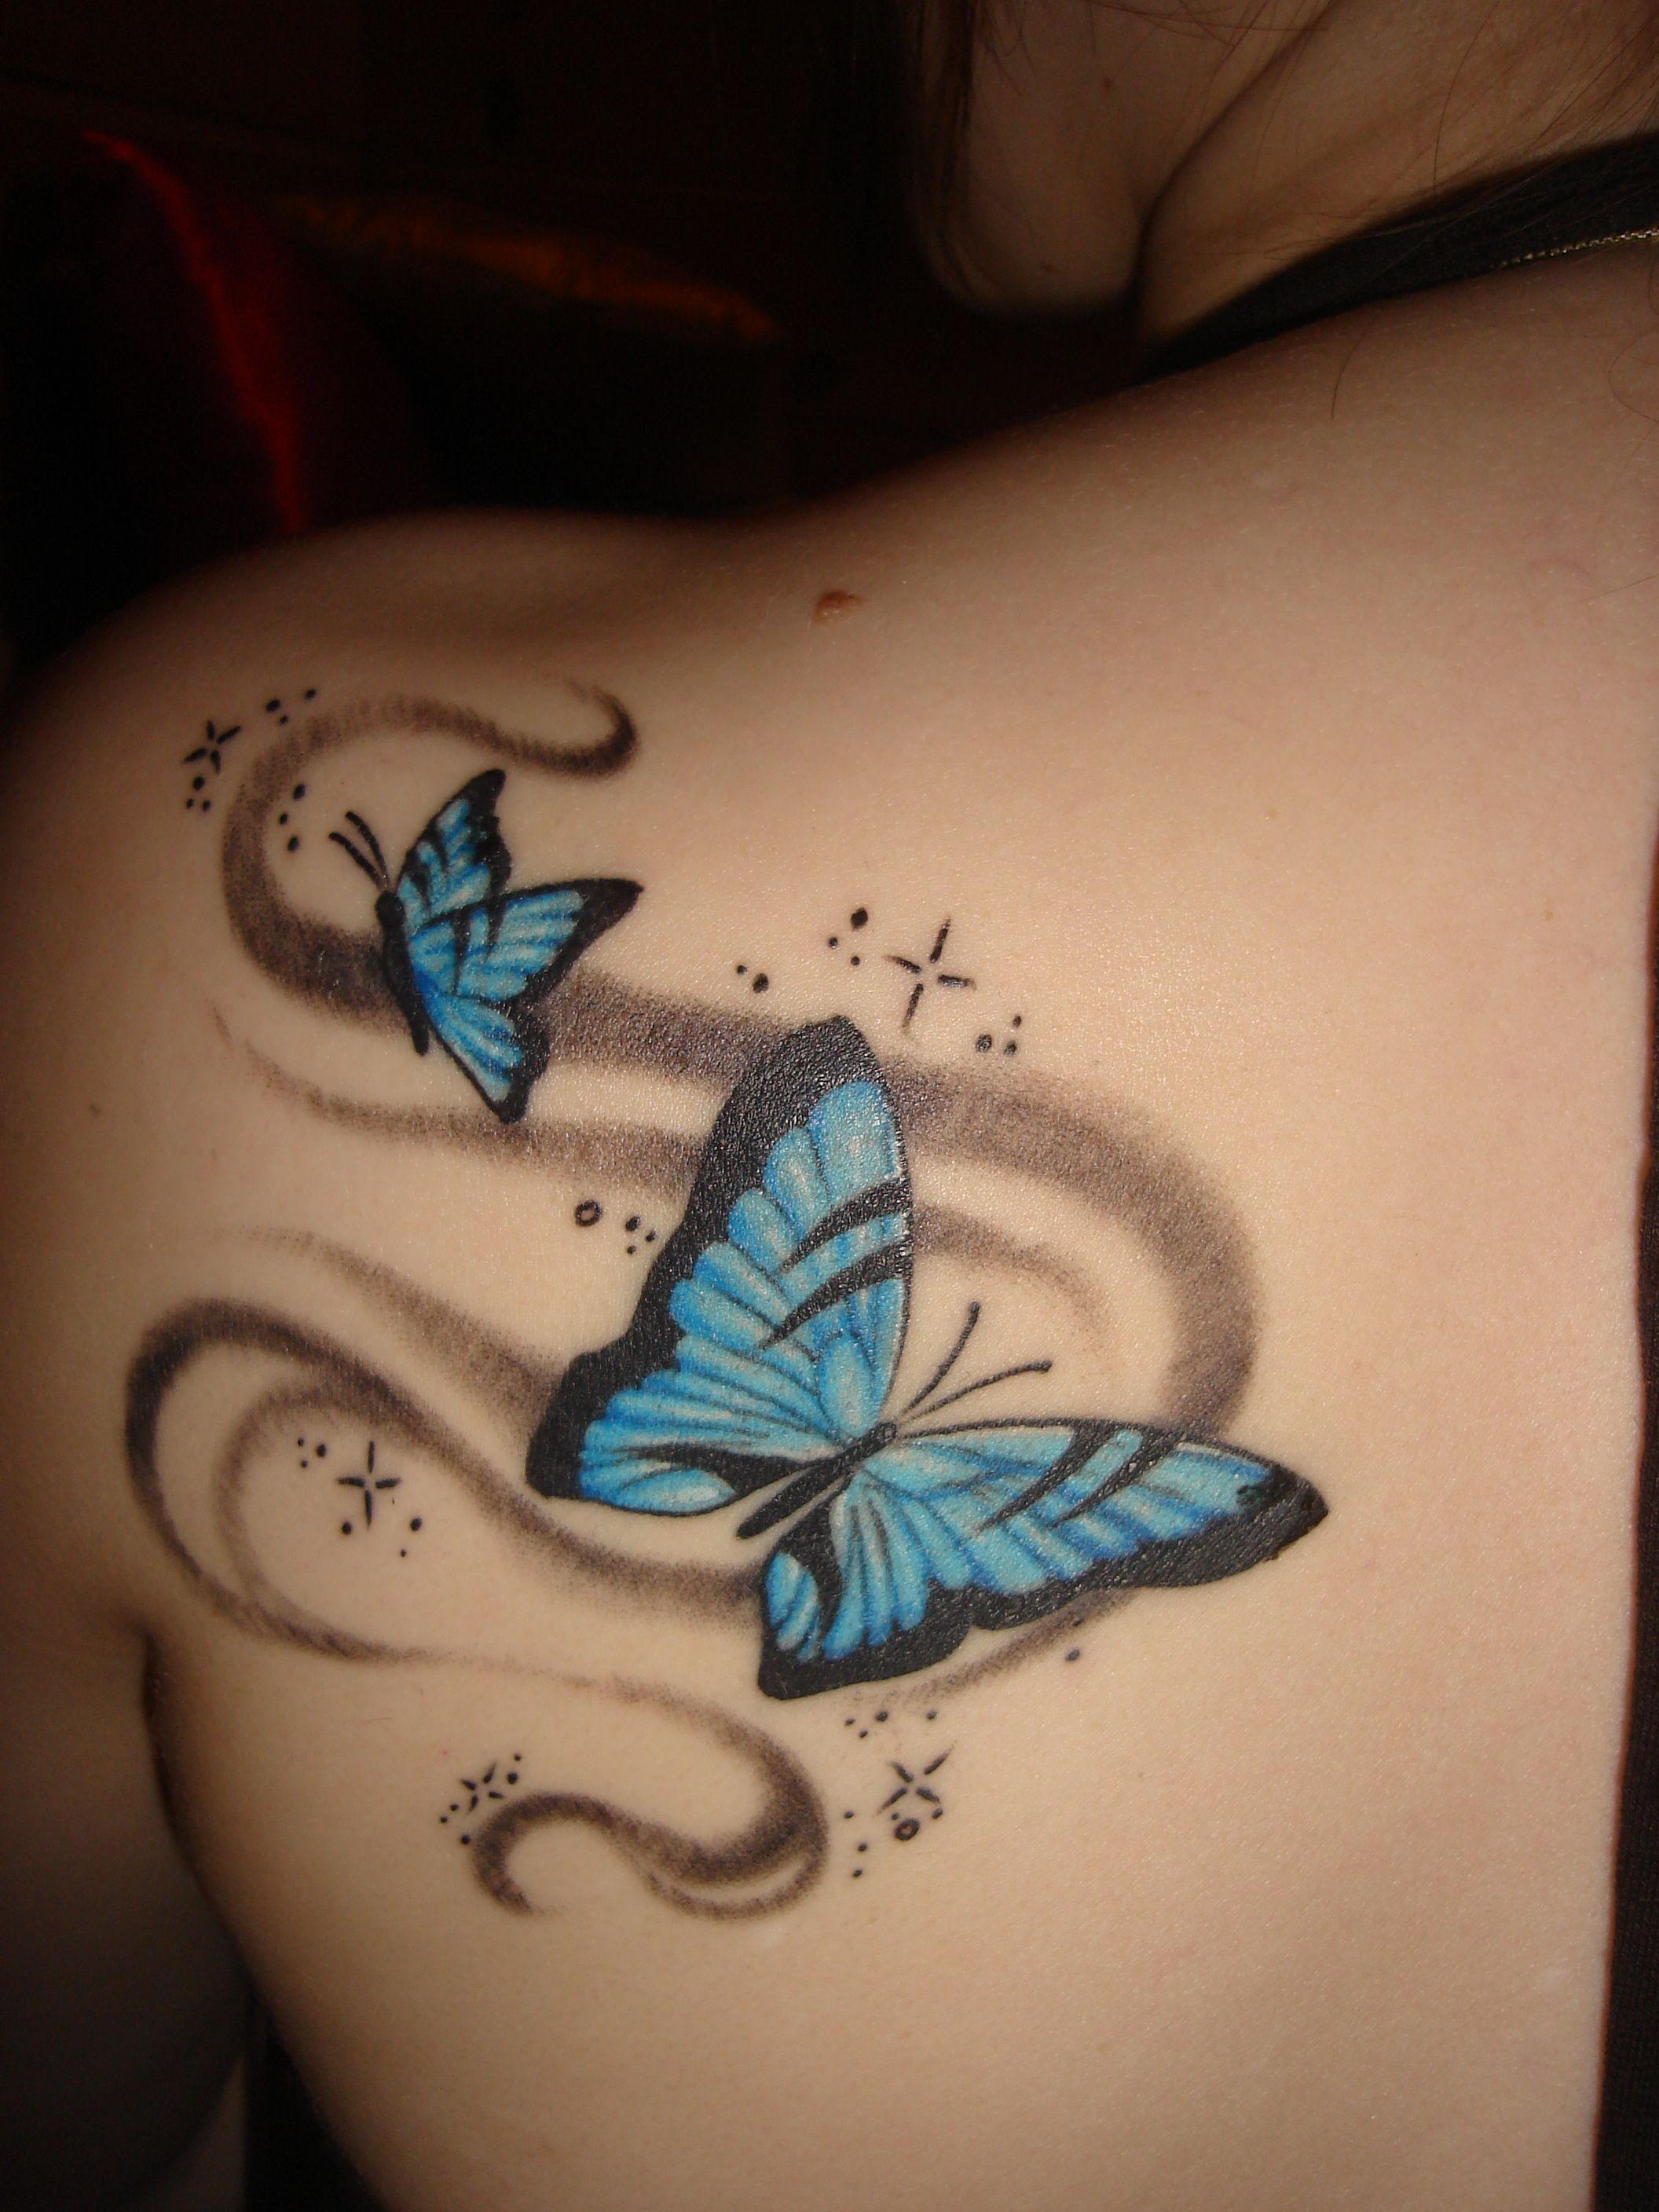 Butterfly Tattoo Meanings And Design Ideas Tattoos And Piercings for measurements 2112 X 2816